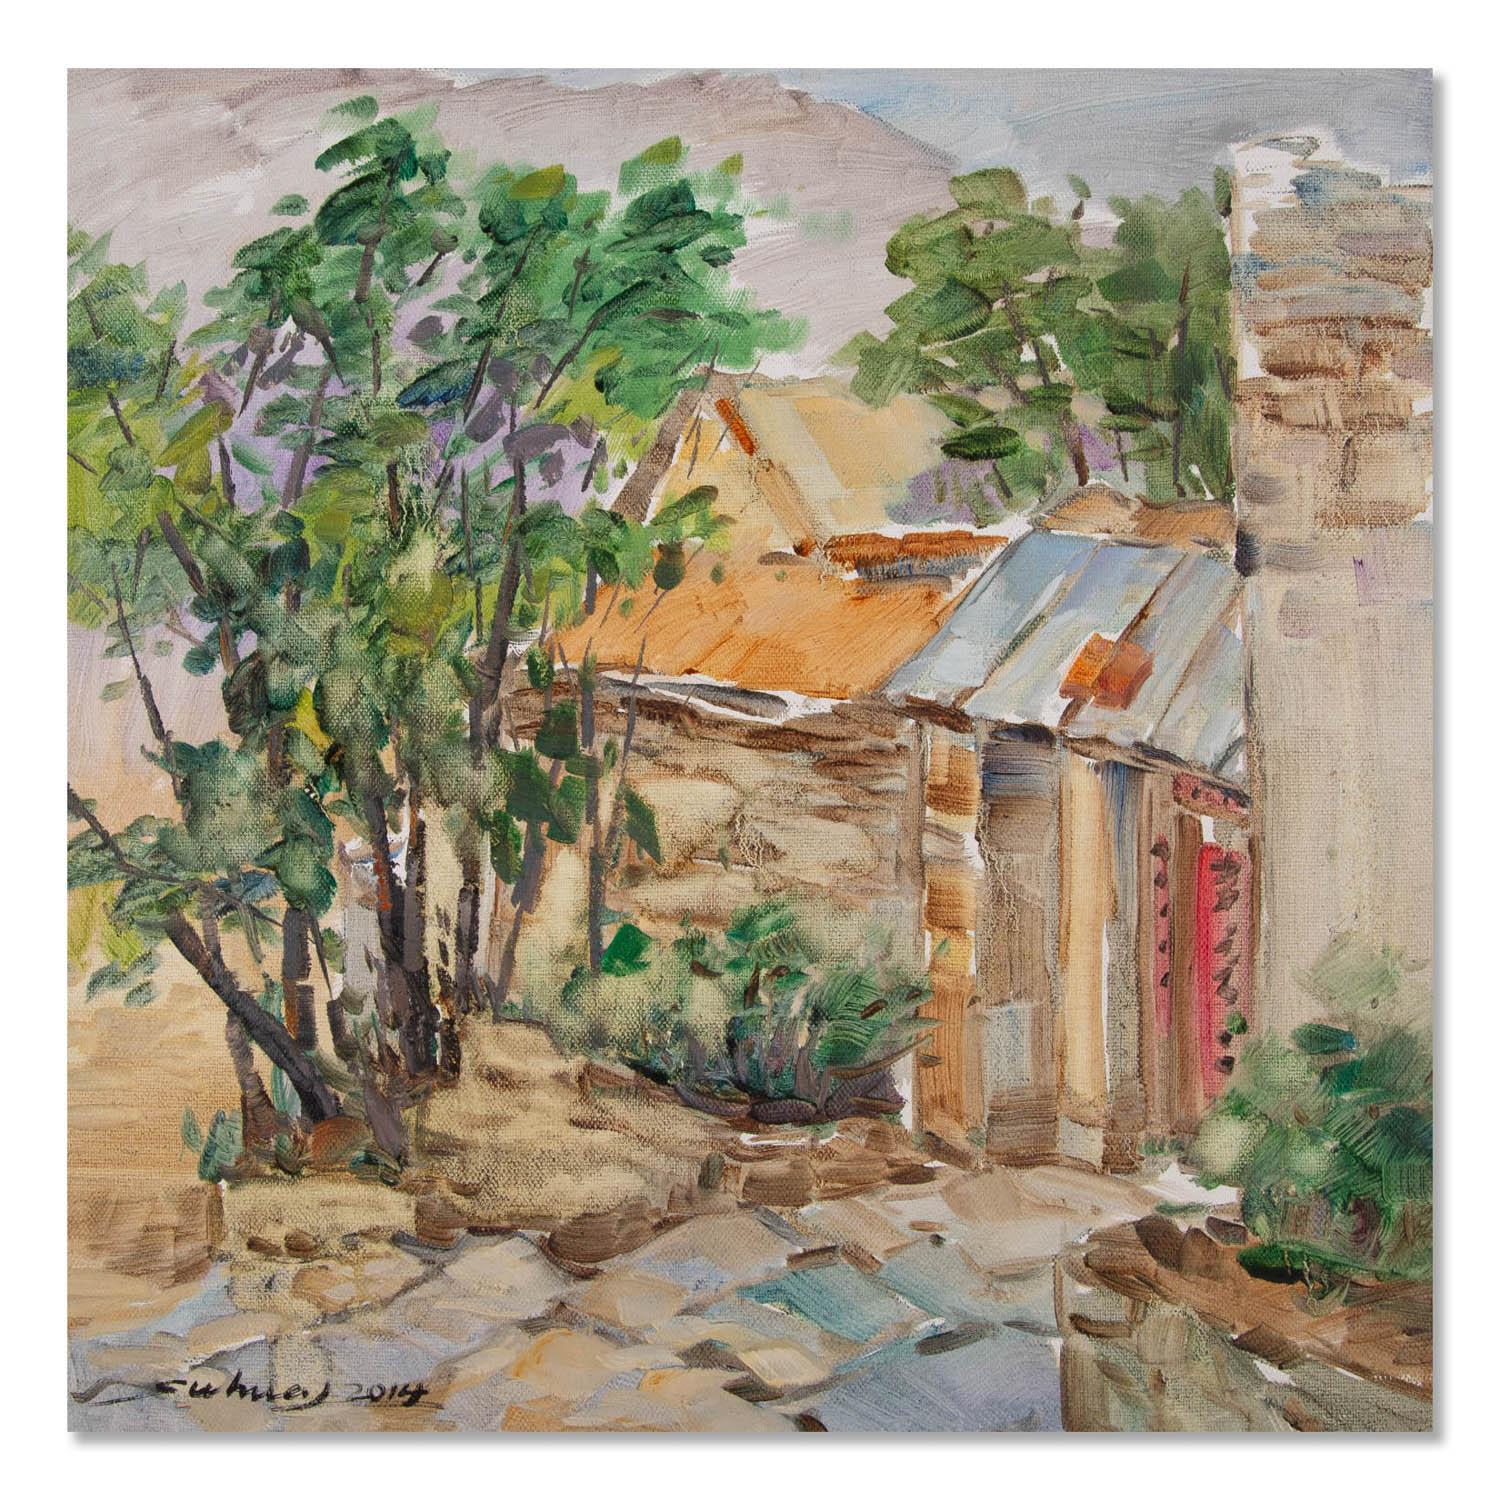  Title: The Tree In Front Of Doorway
 Medium: Oil on canvas
 Size: 19.5 x 19.5 inches
 Frame: Framing options available!
 Condition: The painting appears to be in excellent condition.
 
 Year: 2014
 Artist: Jingjing Wang
 Signature: Signed
